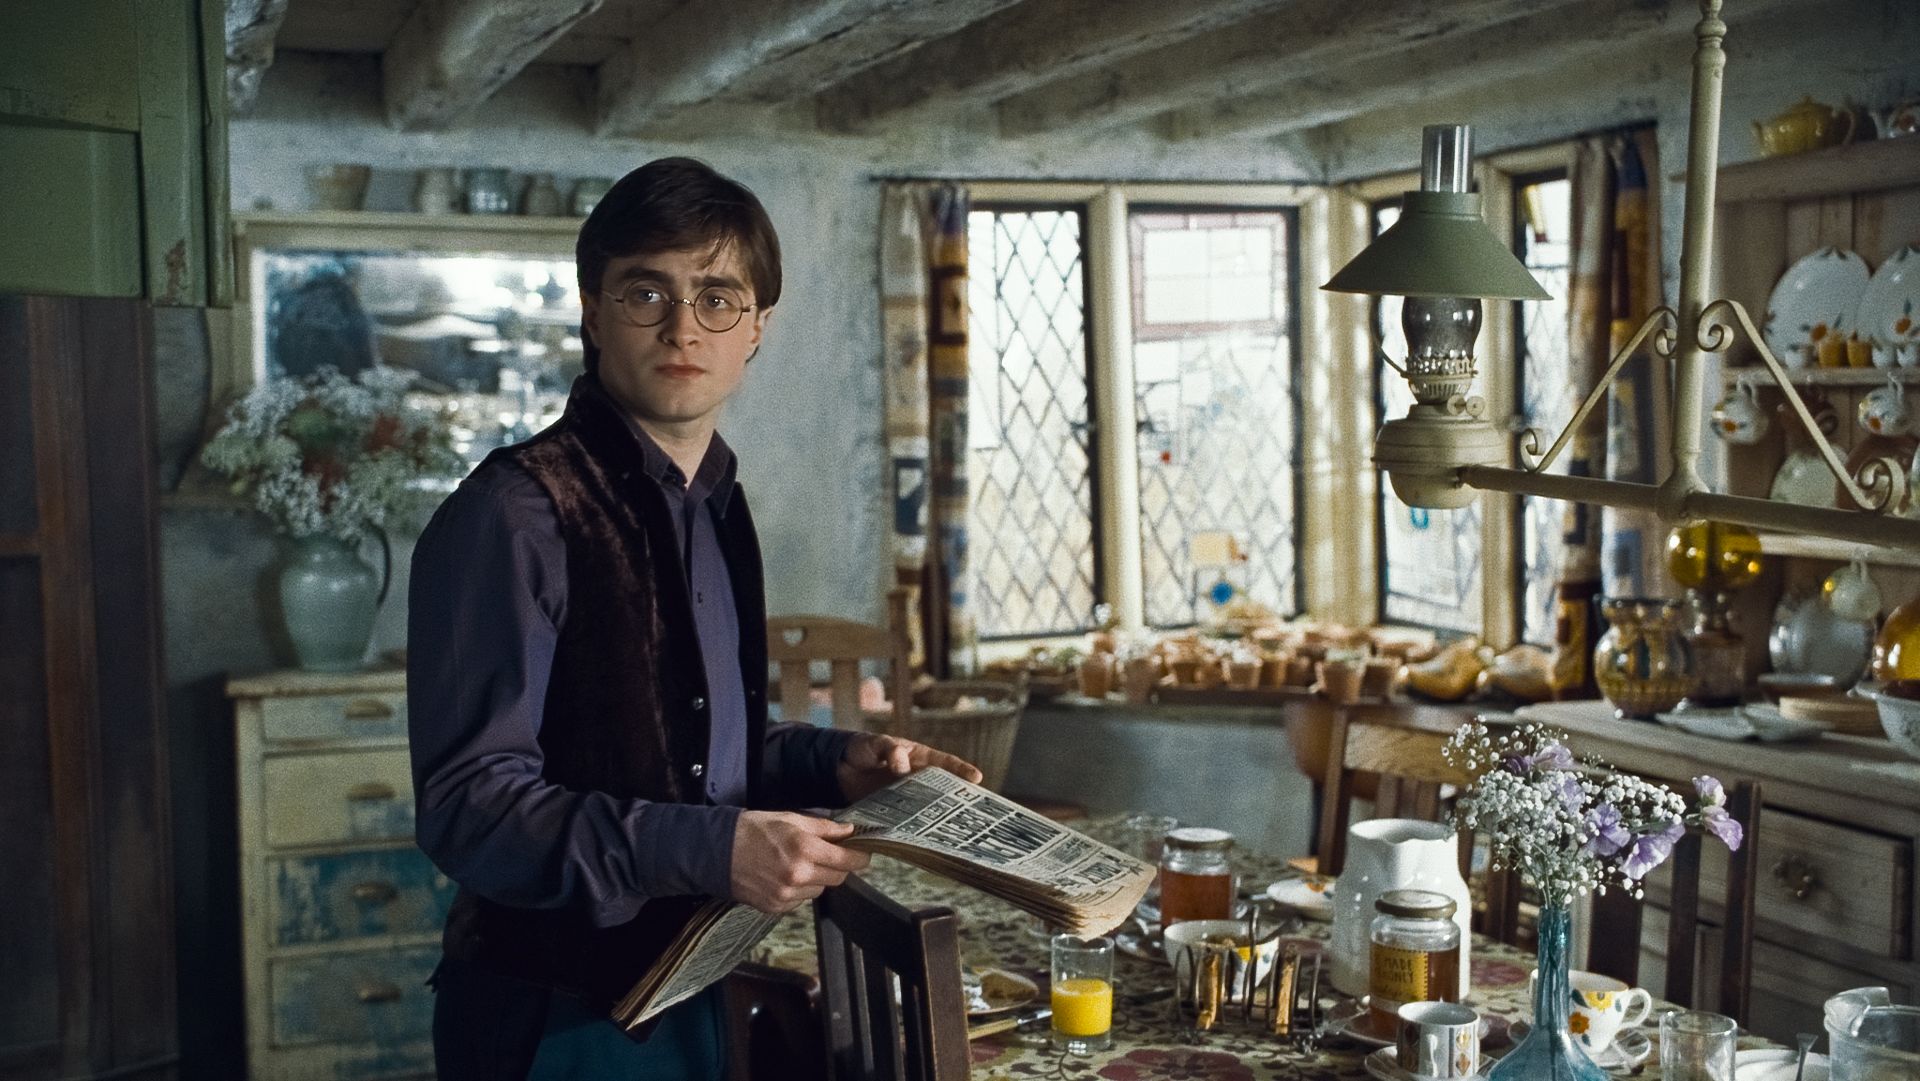 Daniel Radcliffe as Harry Potter in Harry Potter and the Deathly Hallows - Part 1